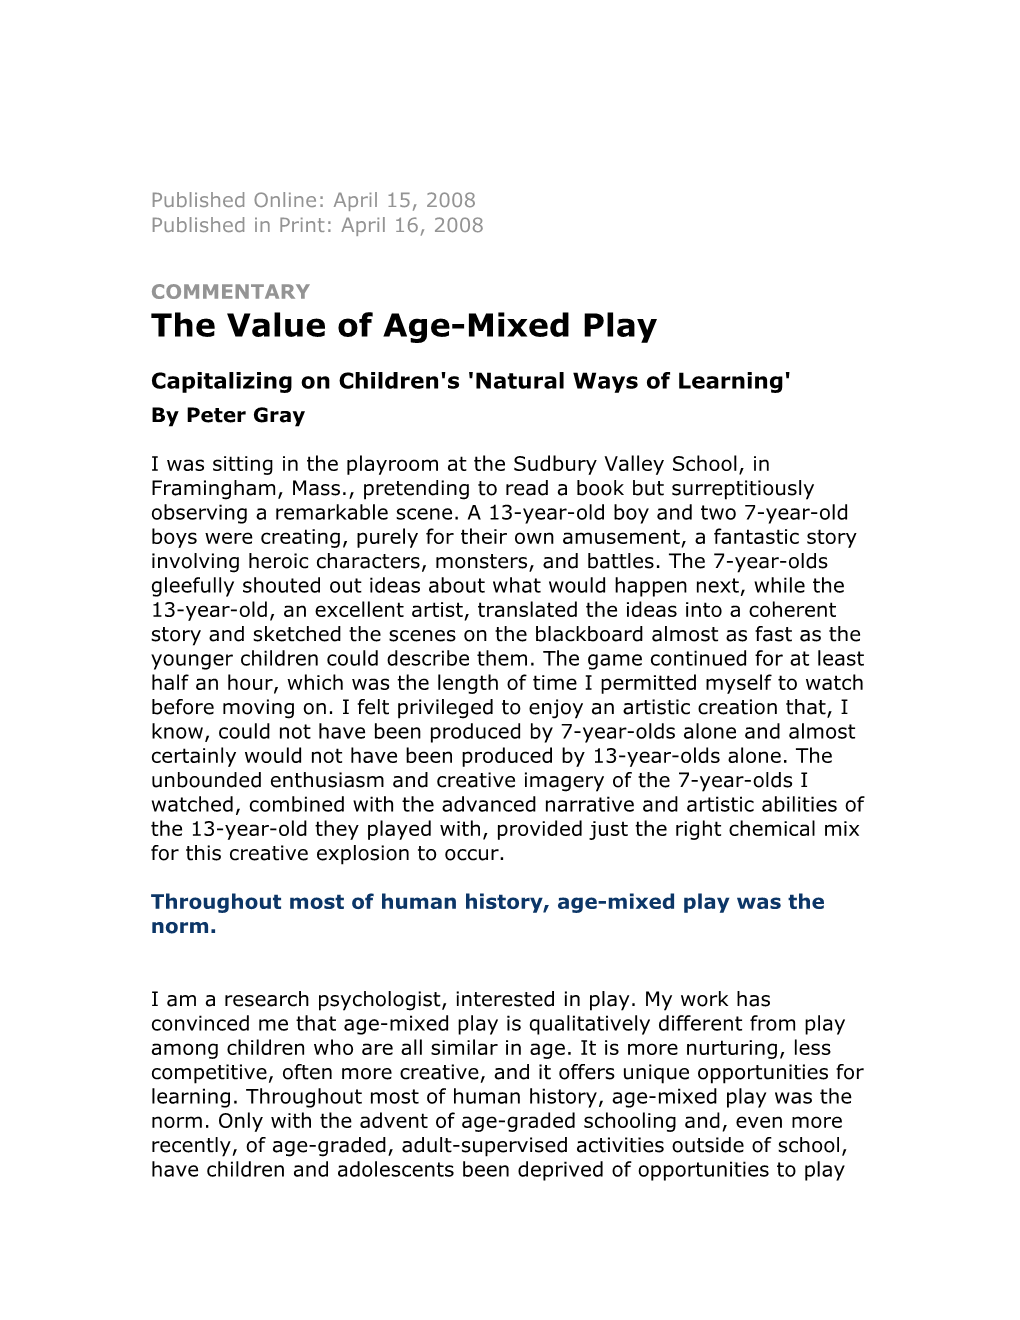 The Value of Age-Mixed Play